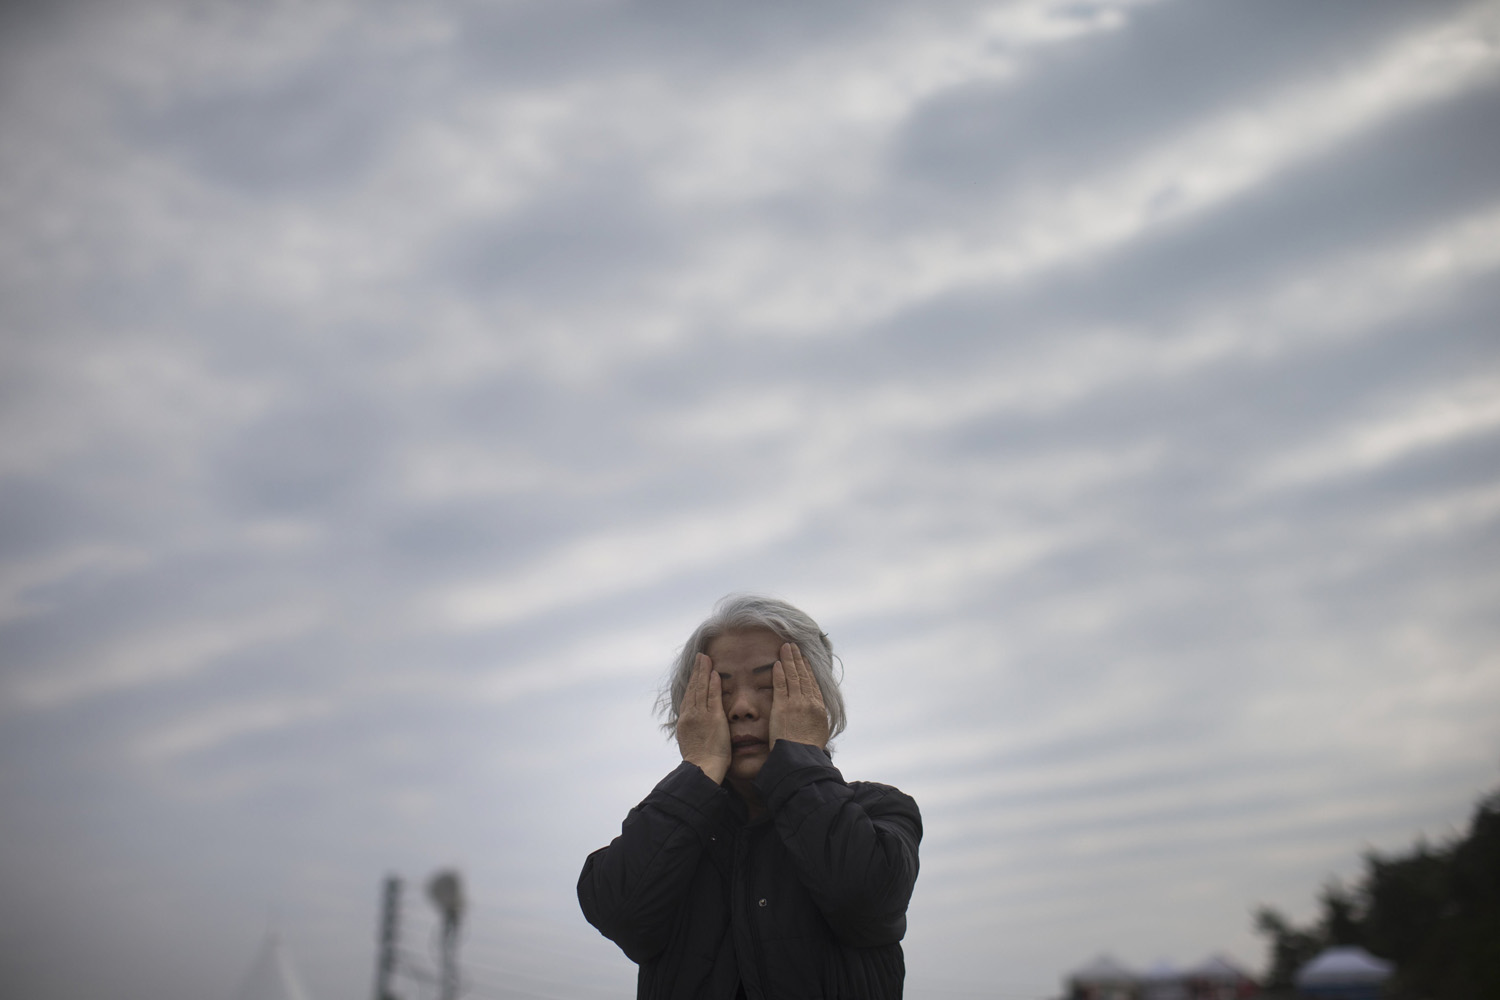 A relative of a missing passenger from the sunken Sewol ferry weeps by the sea in Jindo, South Korea.